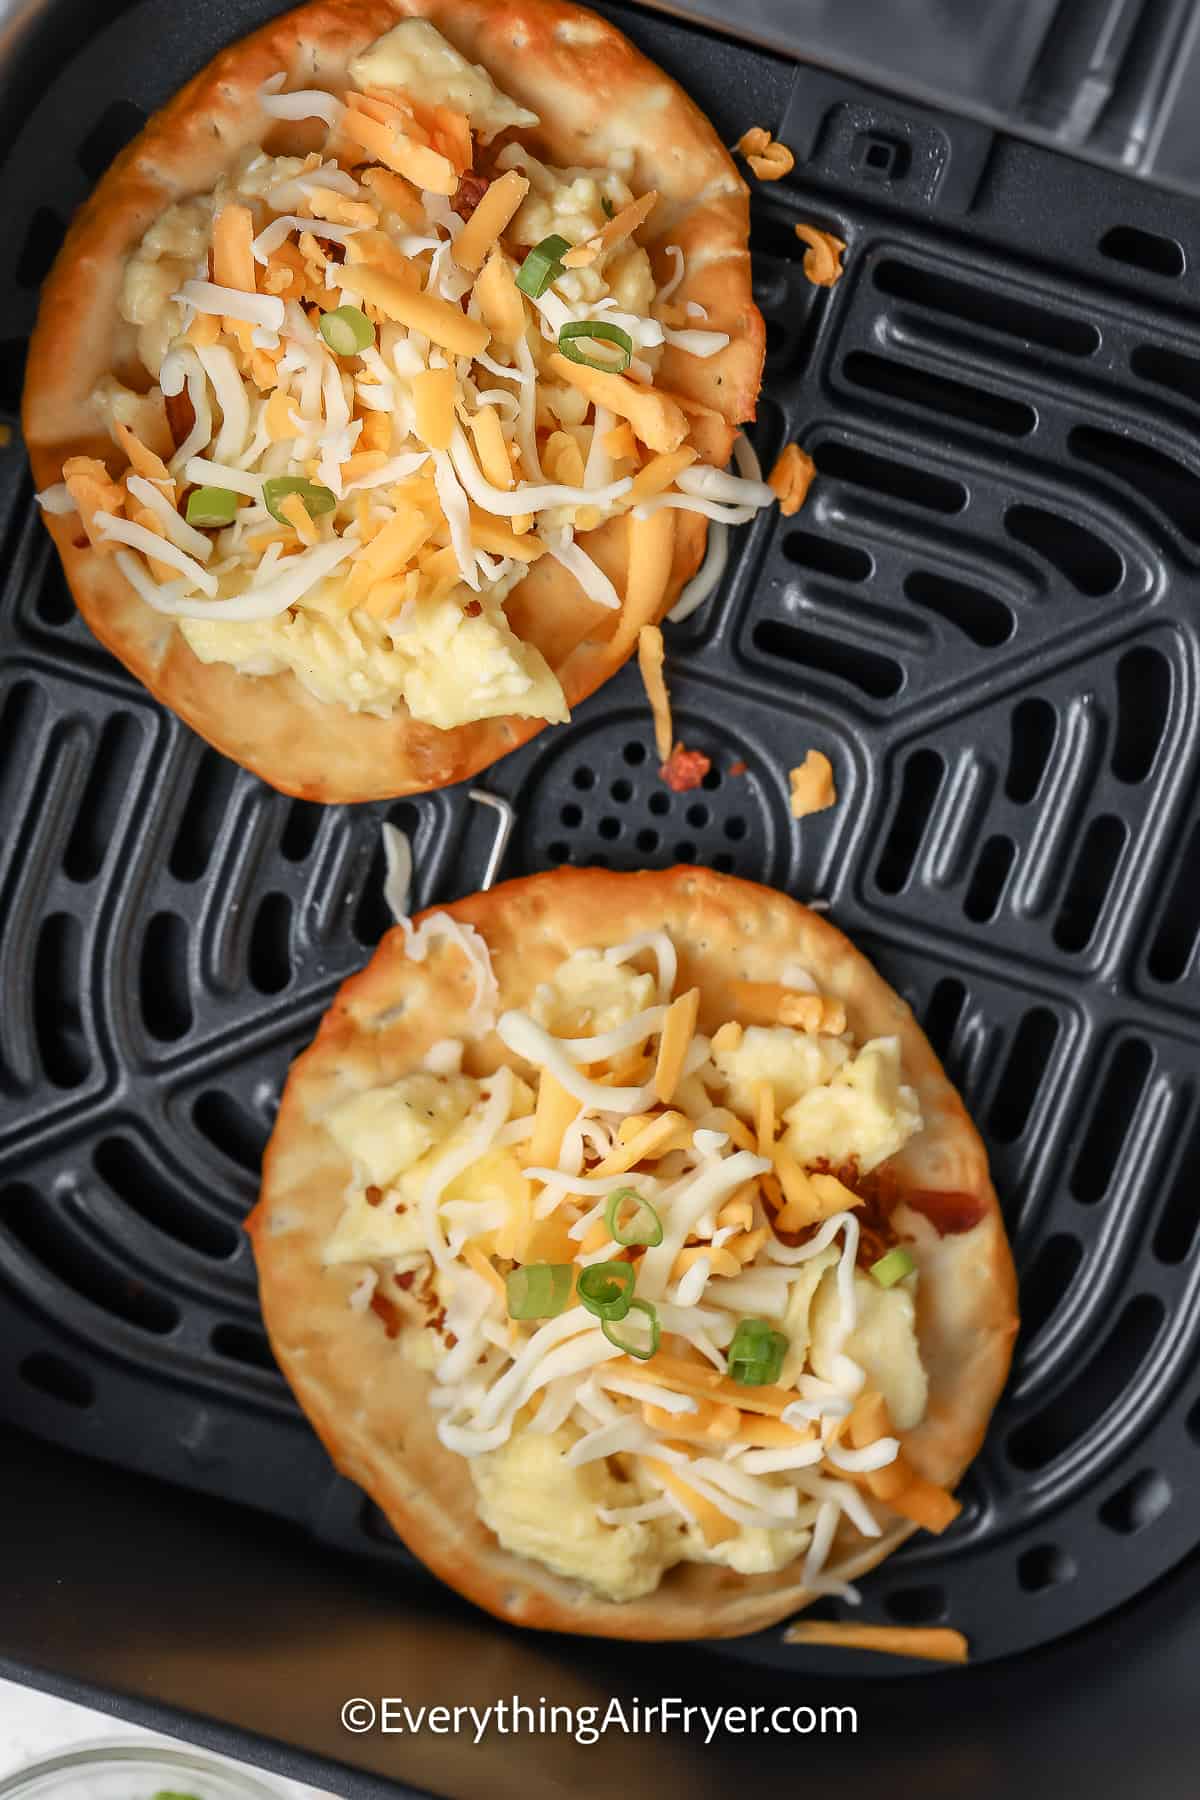 Breakfast Pizza with a Biscuit crust in an air fryer basket